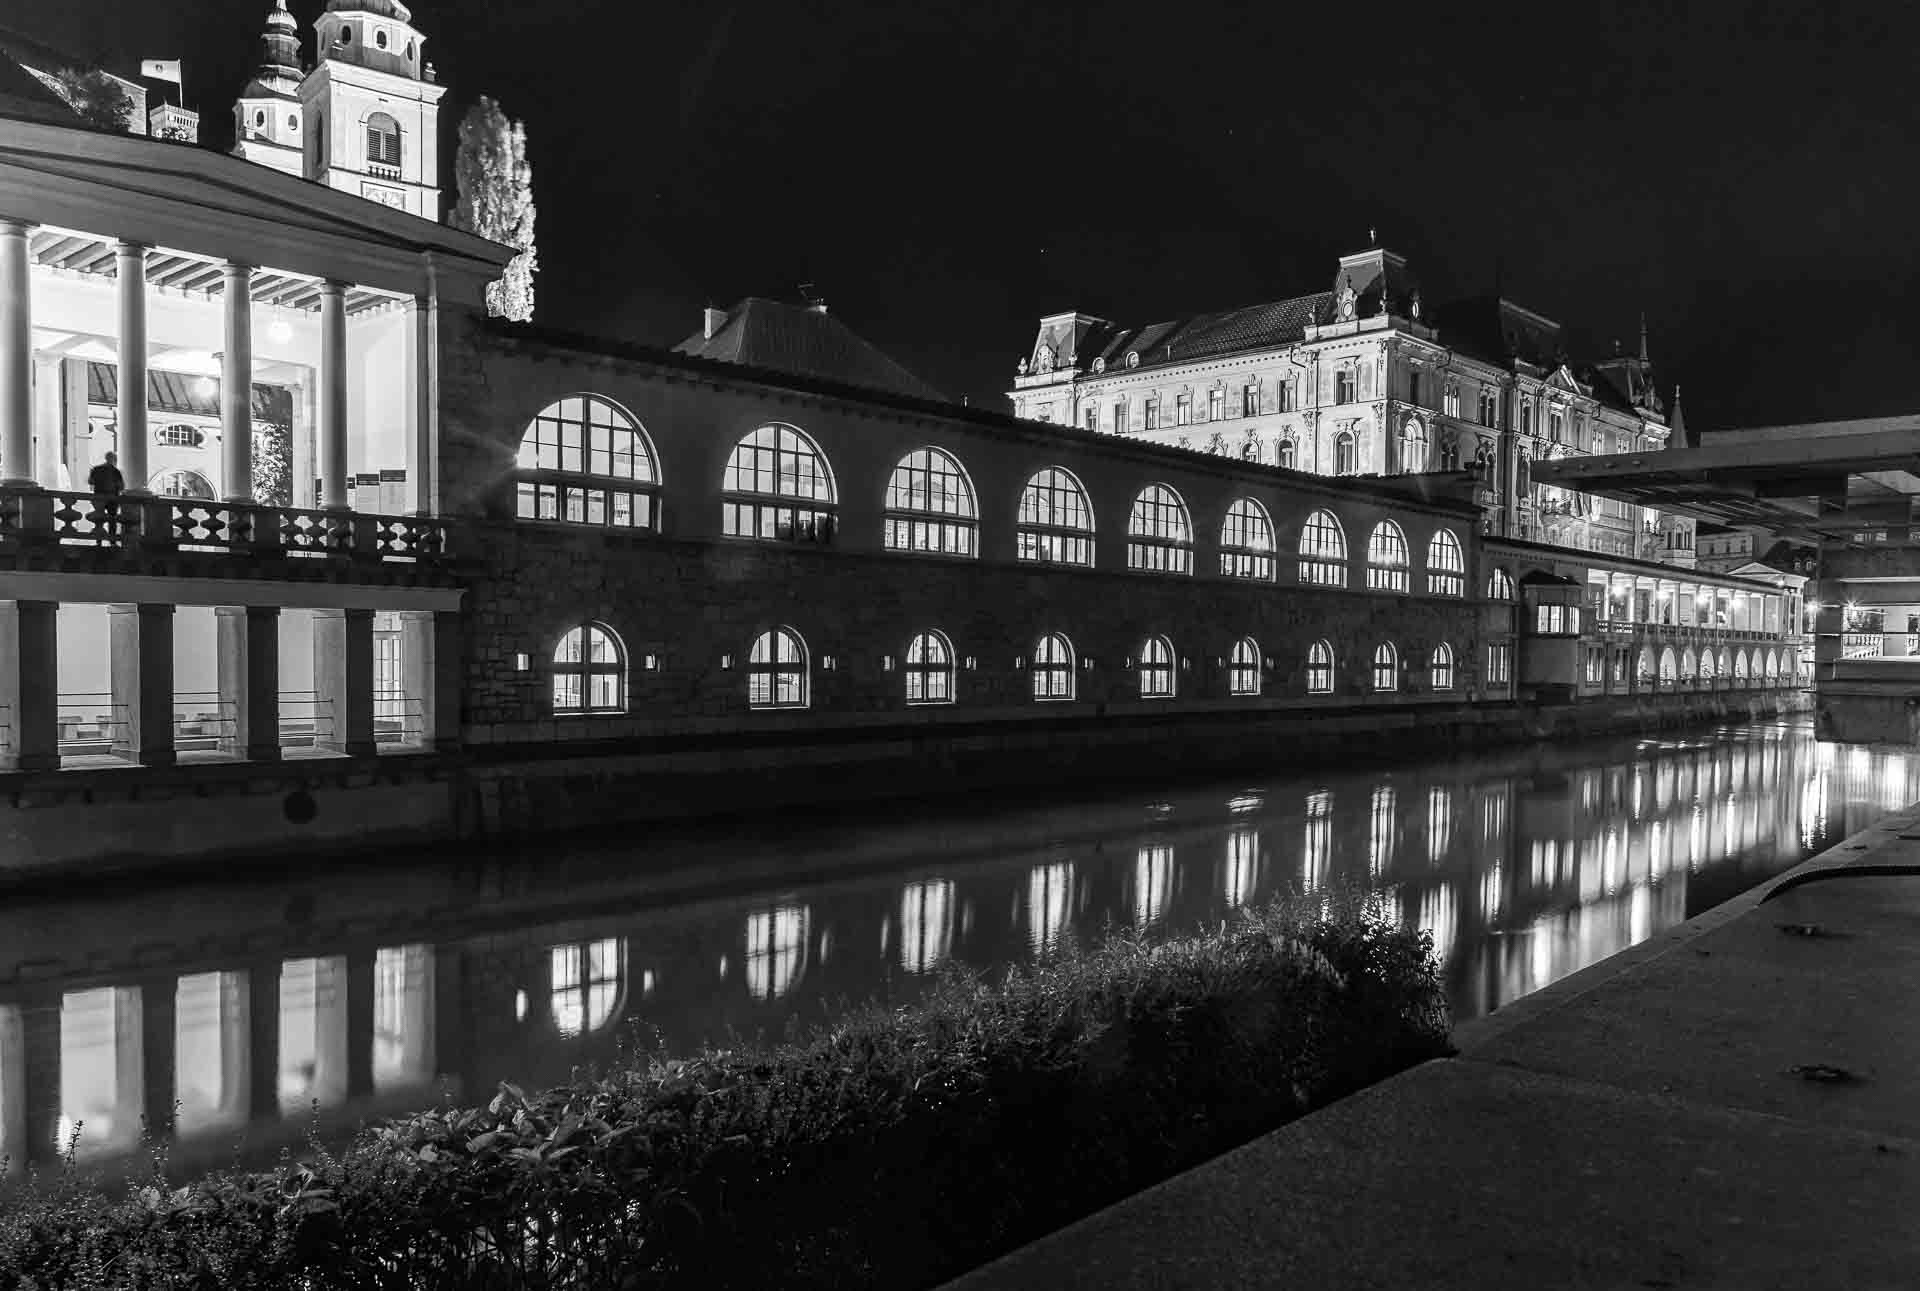 A black and white photography of the river of Ljubljana at night